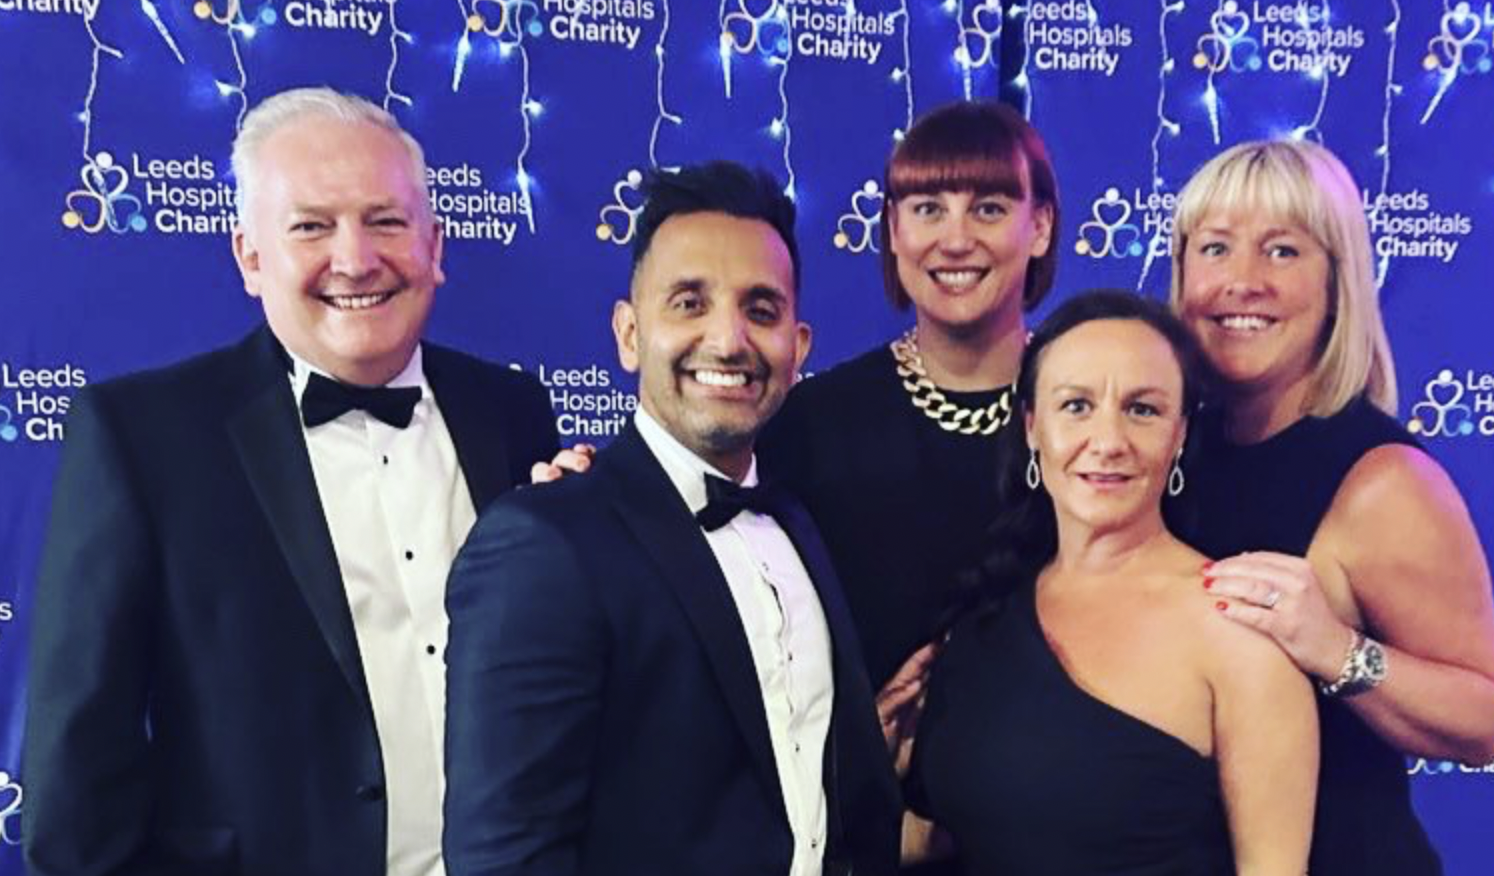 Charity ball raises £50,000 to support poorly children at Leeds Children’s Hospital